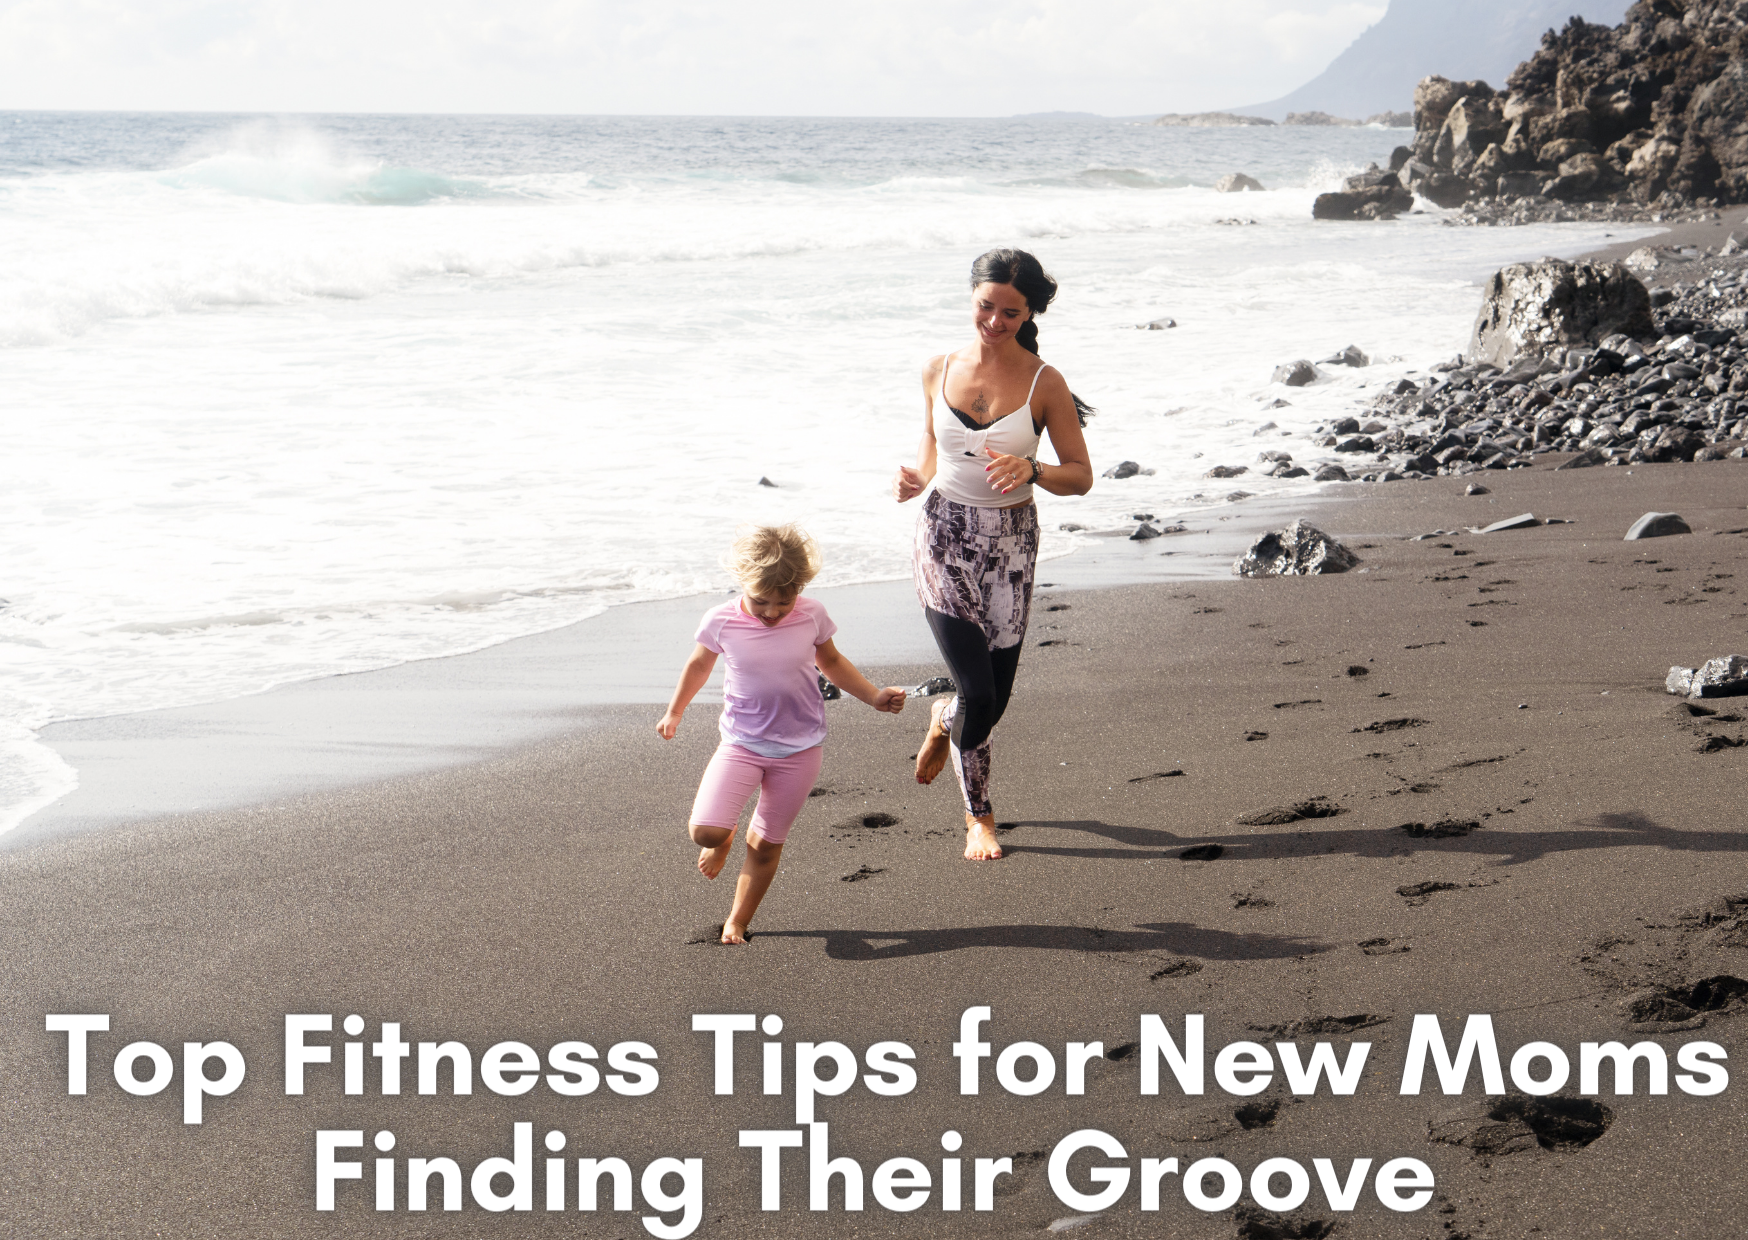 Fit Mama: Top Fitness Tips for New Moms Finding Their Groove